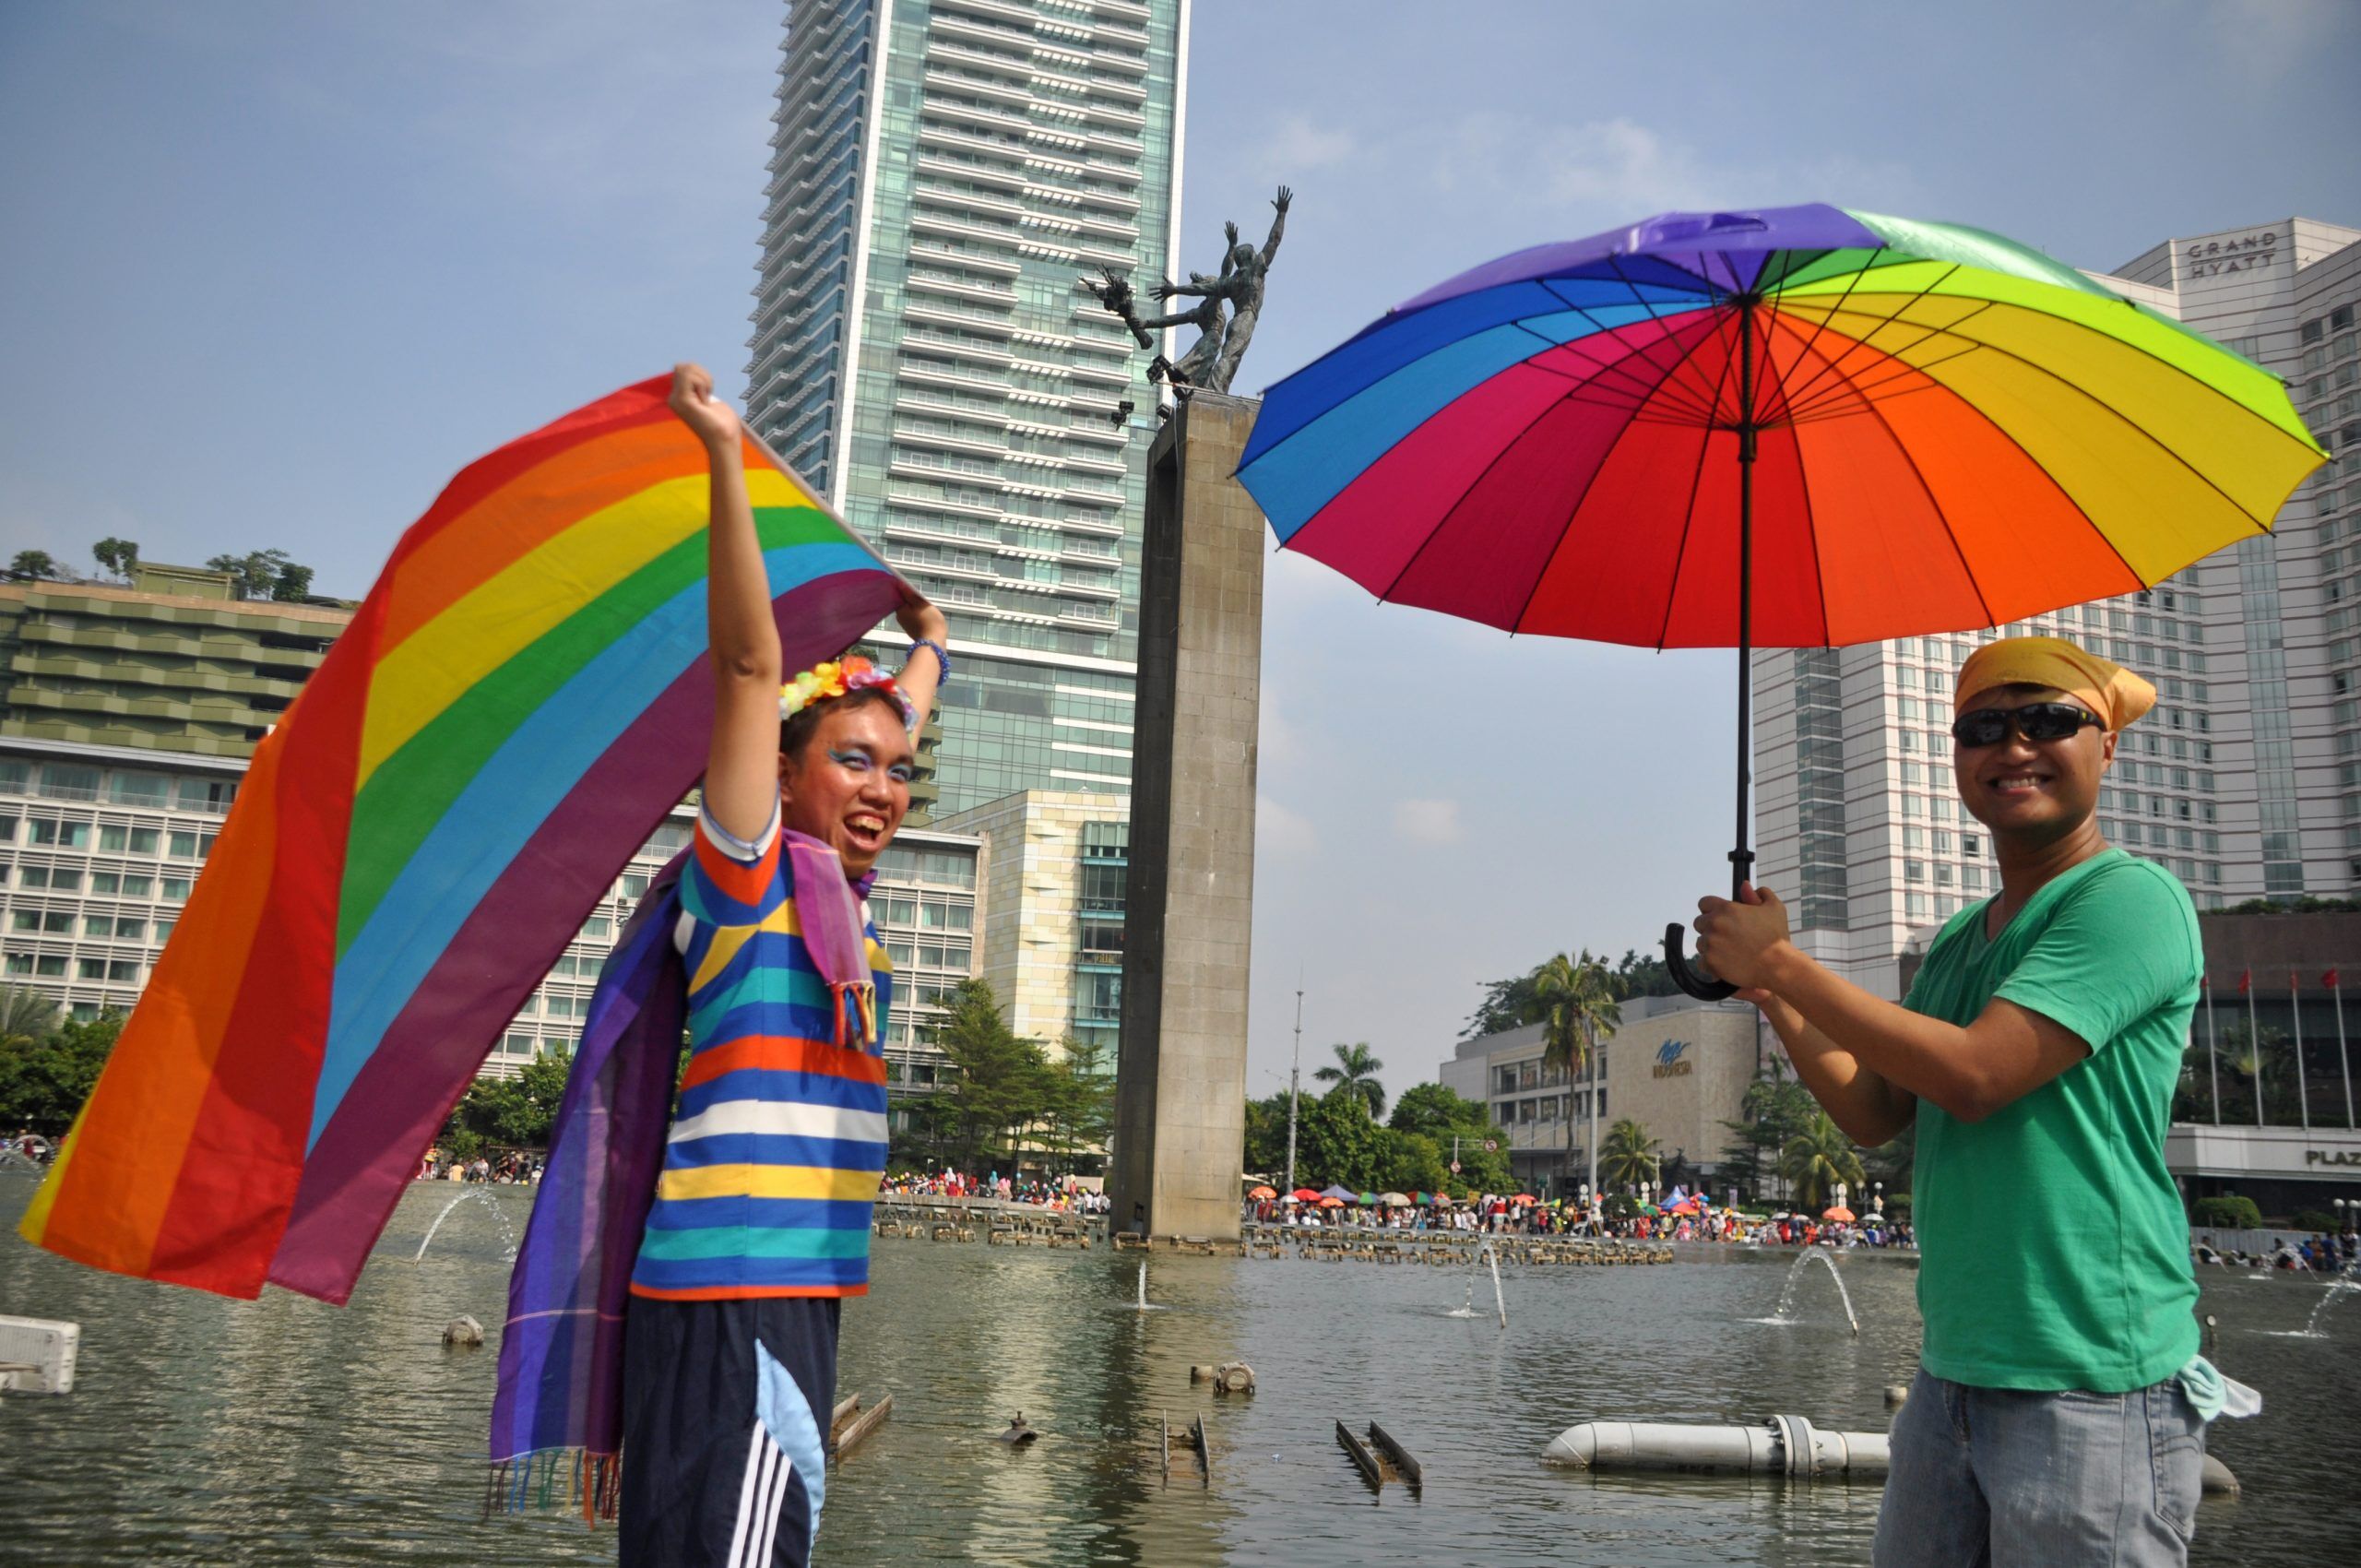 May 17, 2015: The International Day Against Homophobia, Biphobia, and Transphobia was marked with rainbow flags in Jakarta